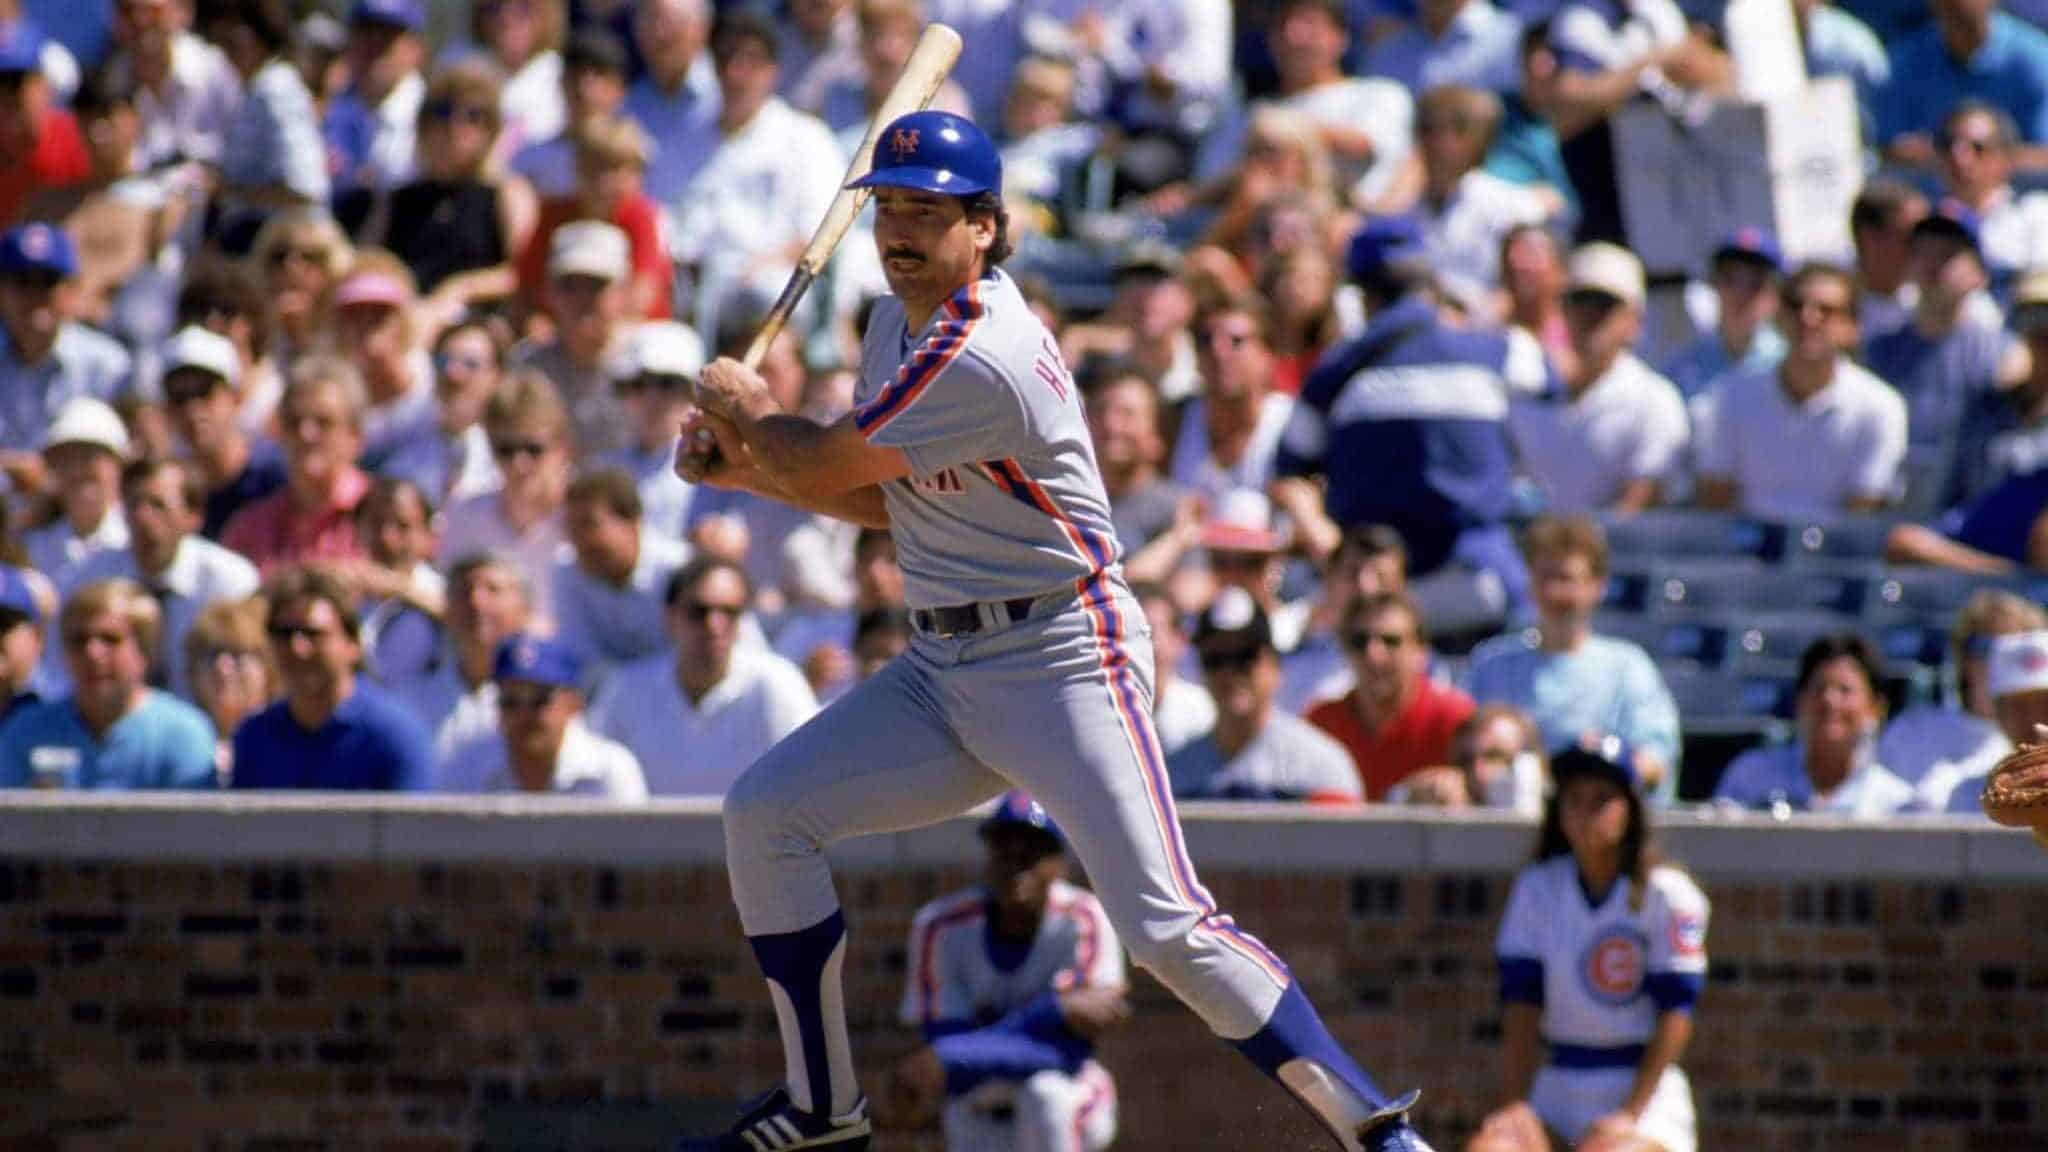 CHICAGO - 1988: First baseman Keith Hernandez #17 of the New York Mets swings during a 1988 game against the Chicago Cubs at Wrigley Field in Chicago, Illinois.